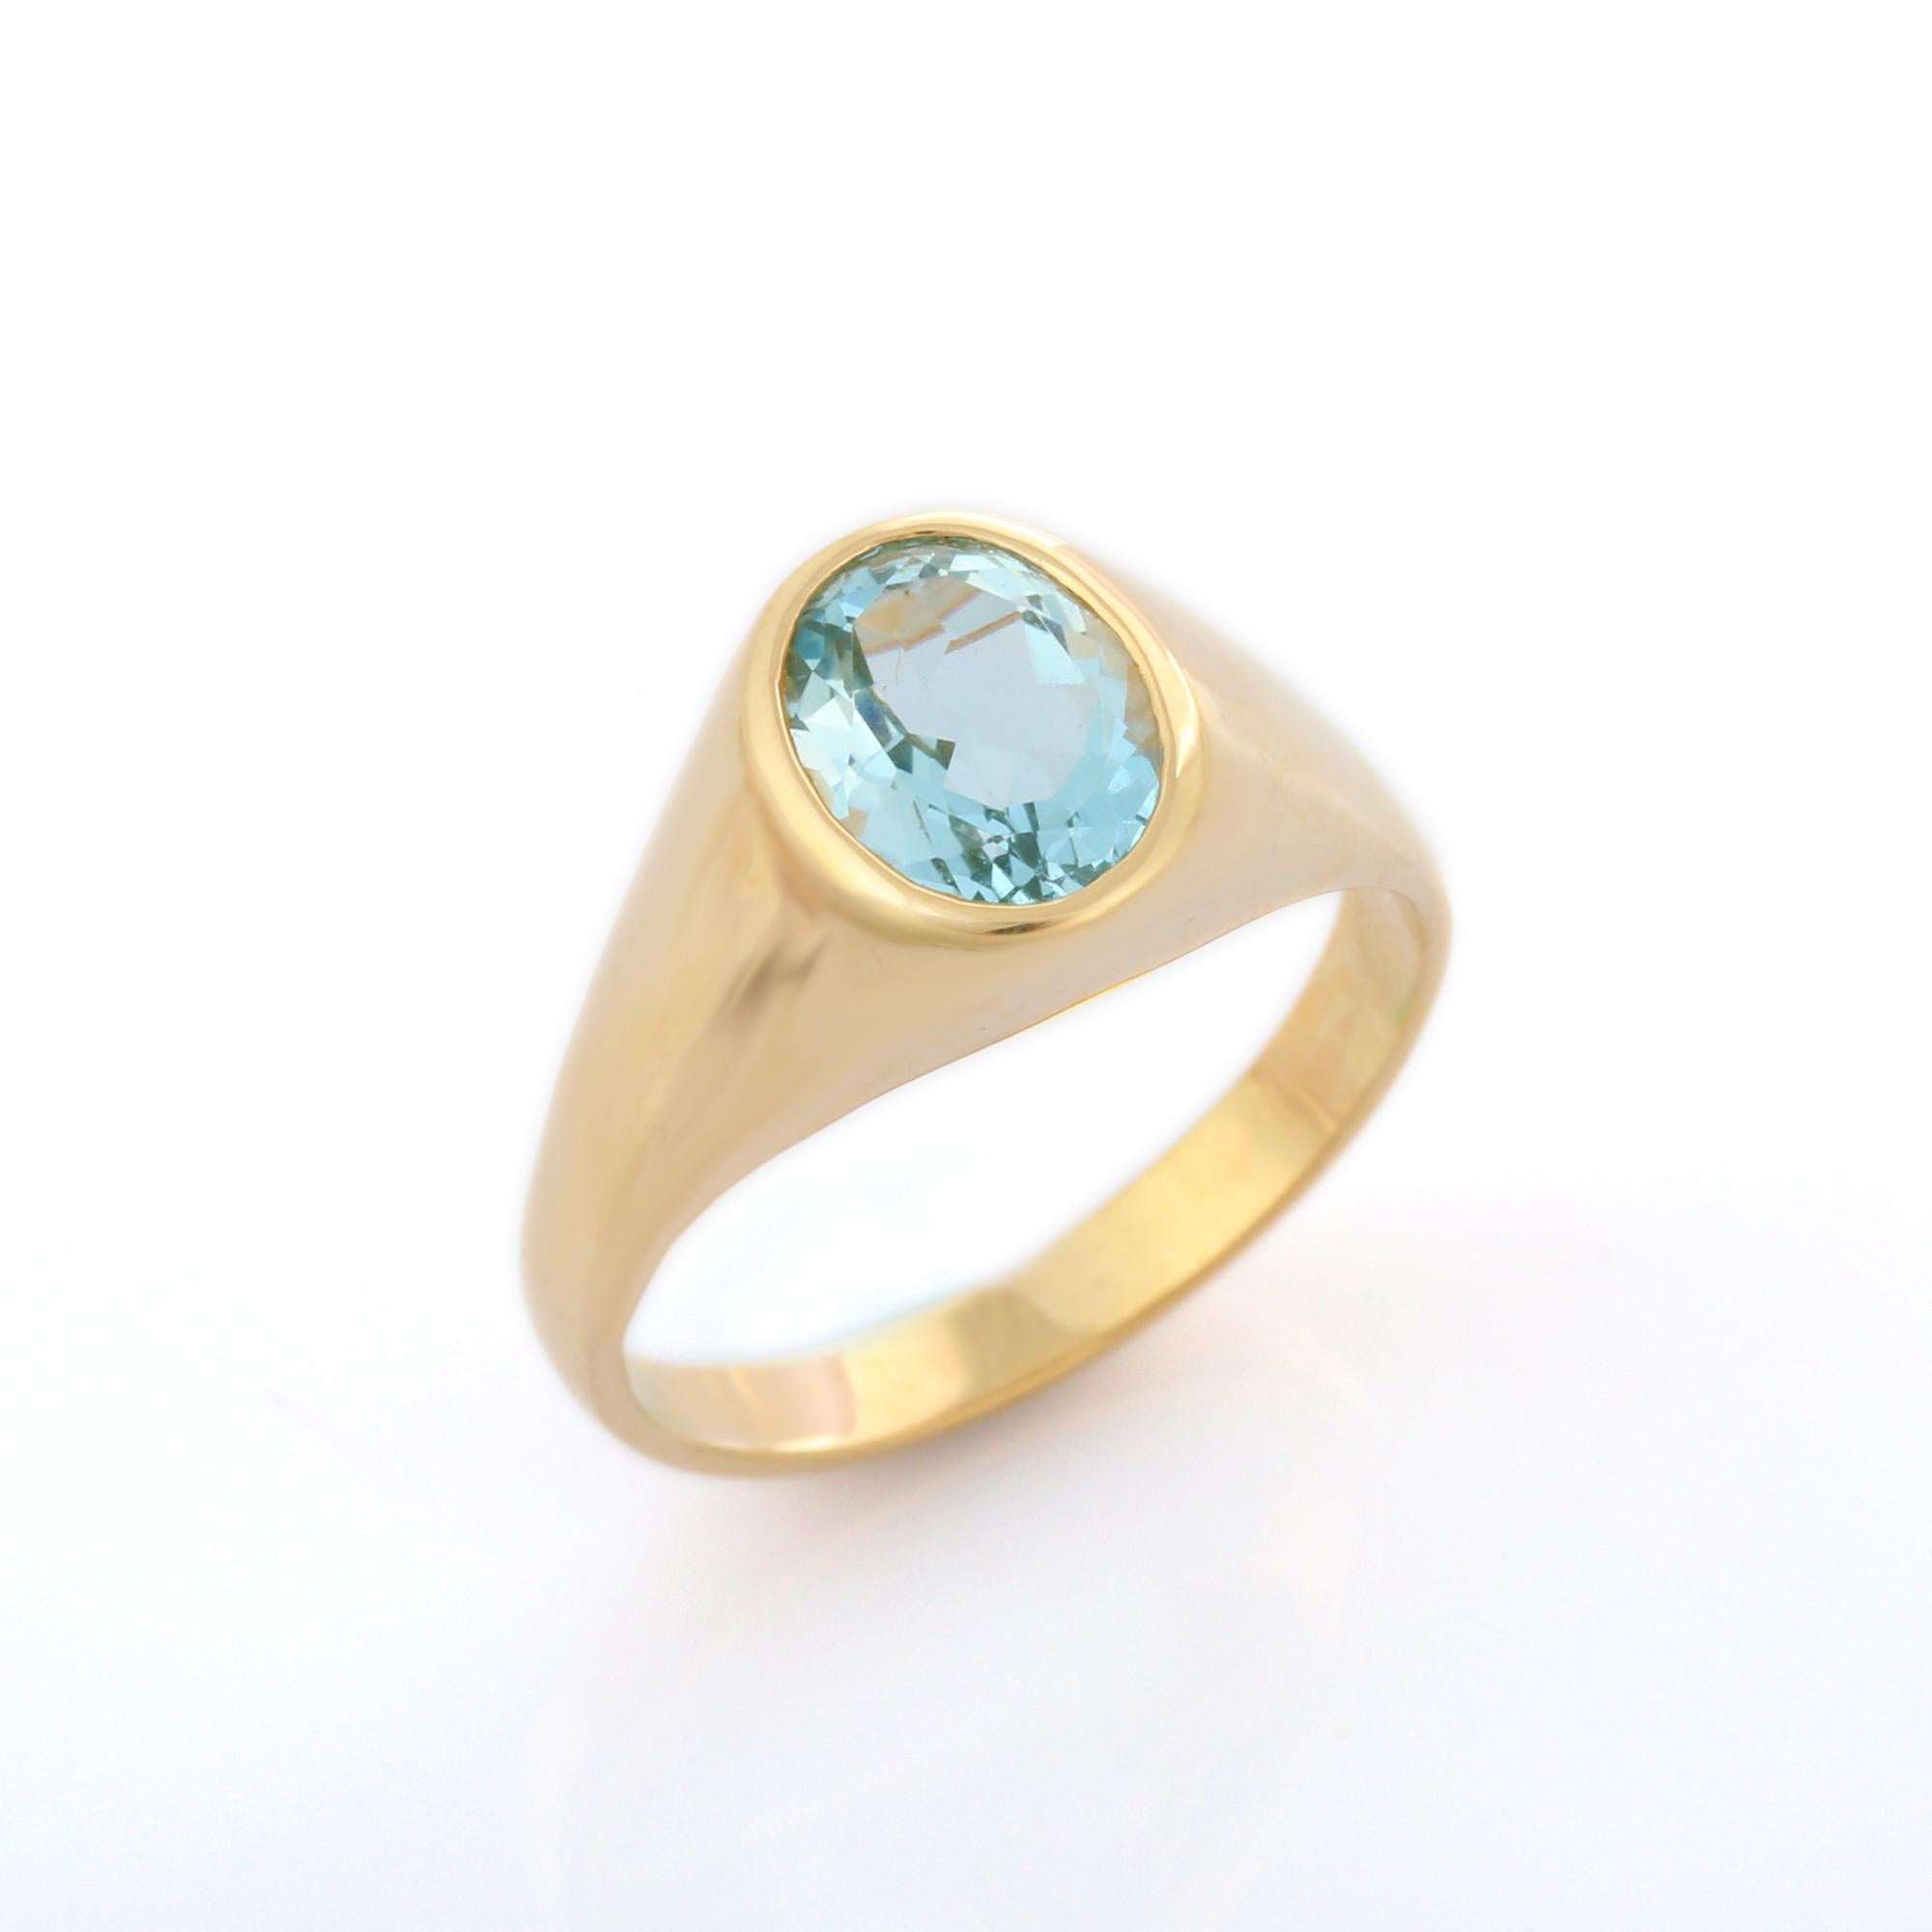 For Sale:  14K Yellow Gold 1.62 Carat Oval Cut Aquamarine Engagement Ring 6